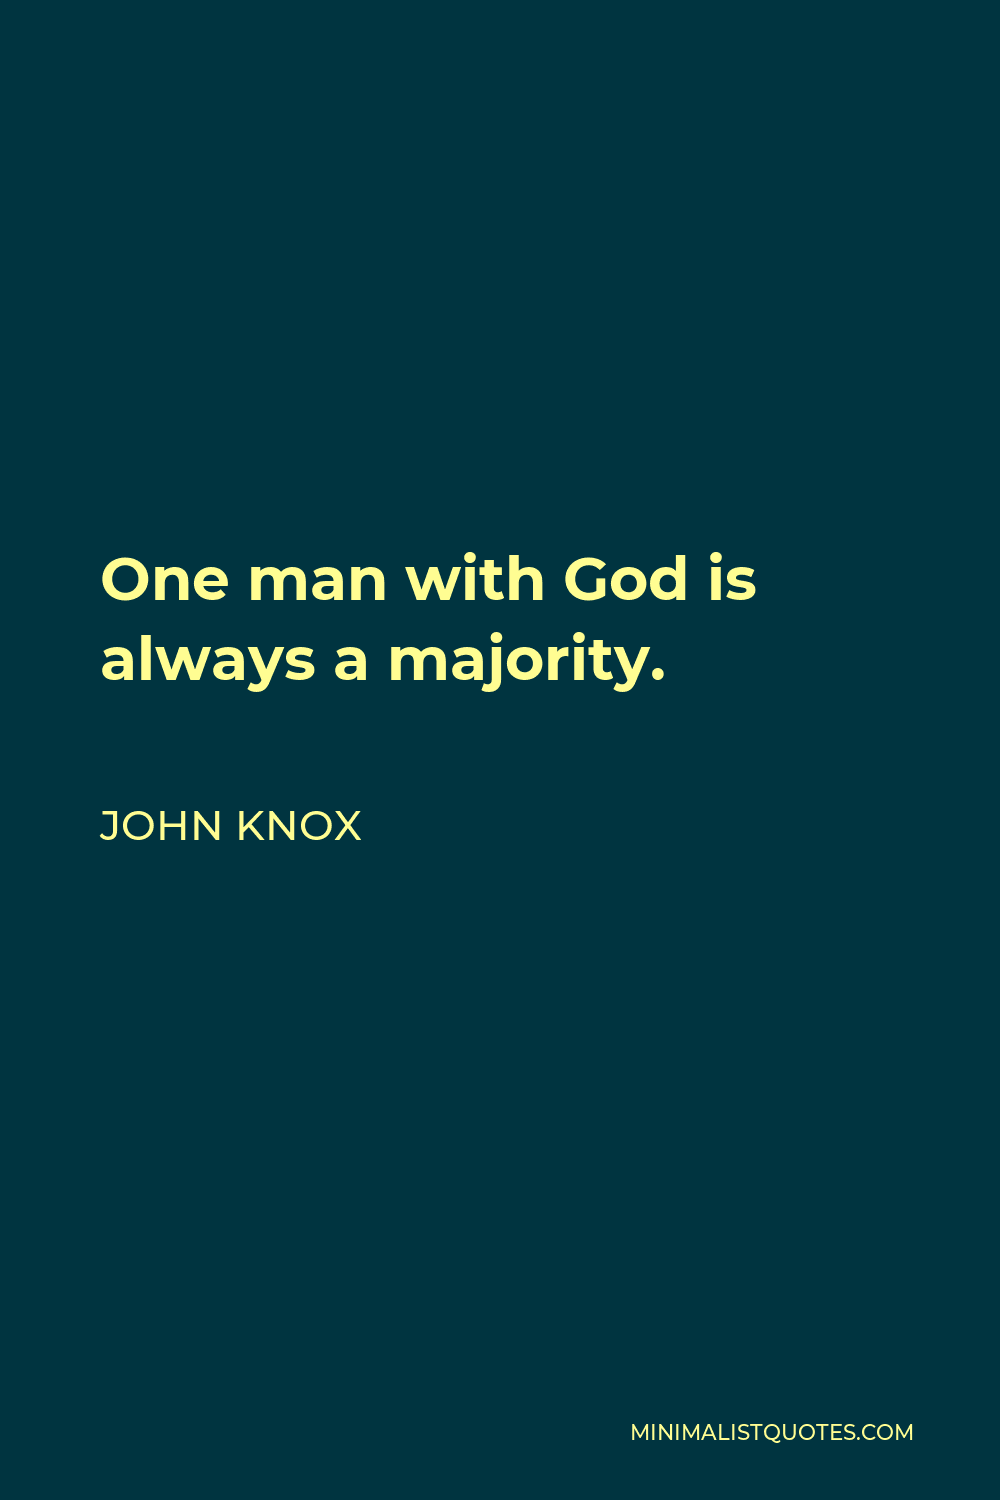 John Knox Quote - One man with God is always a majority.